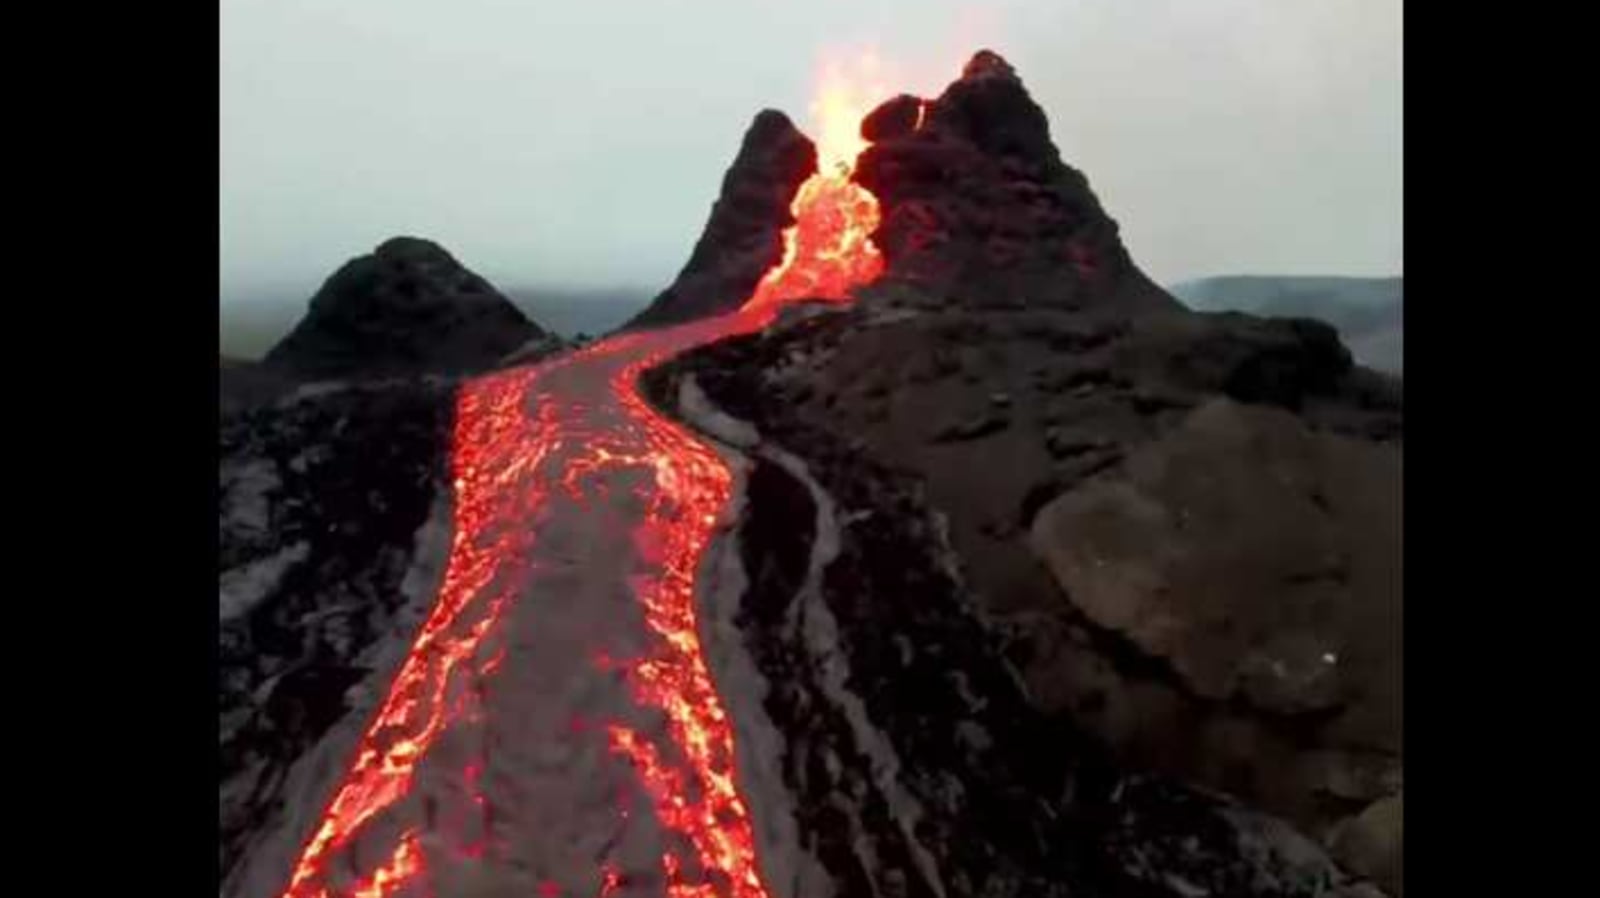 Spectacular drone footage captures lava spewing from Iceland volcano. Watch